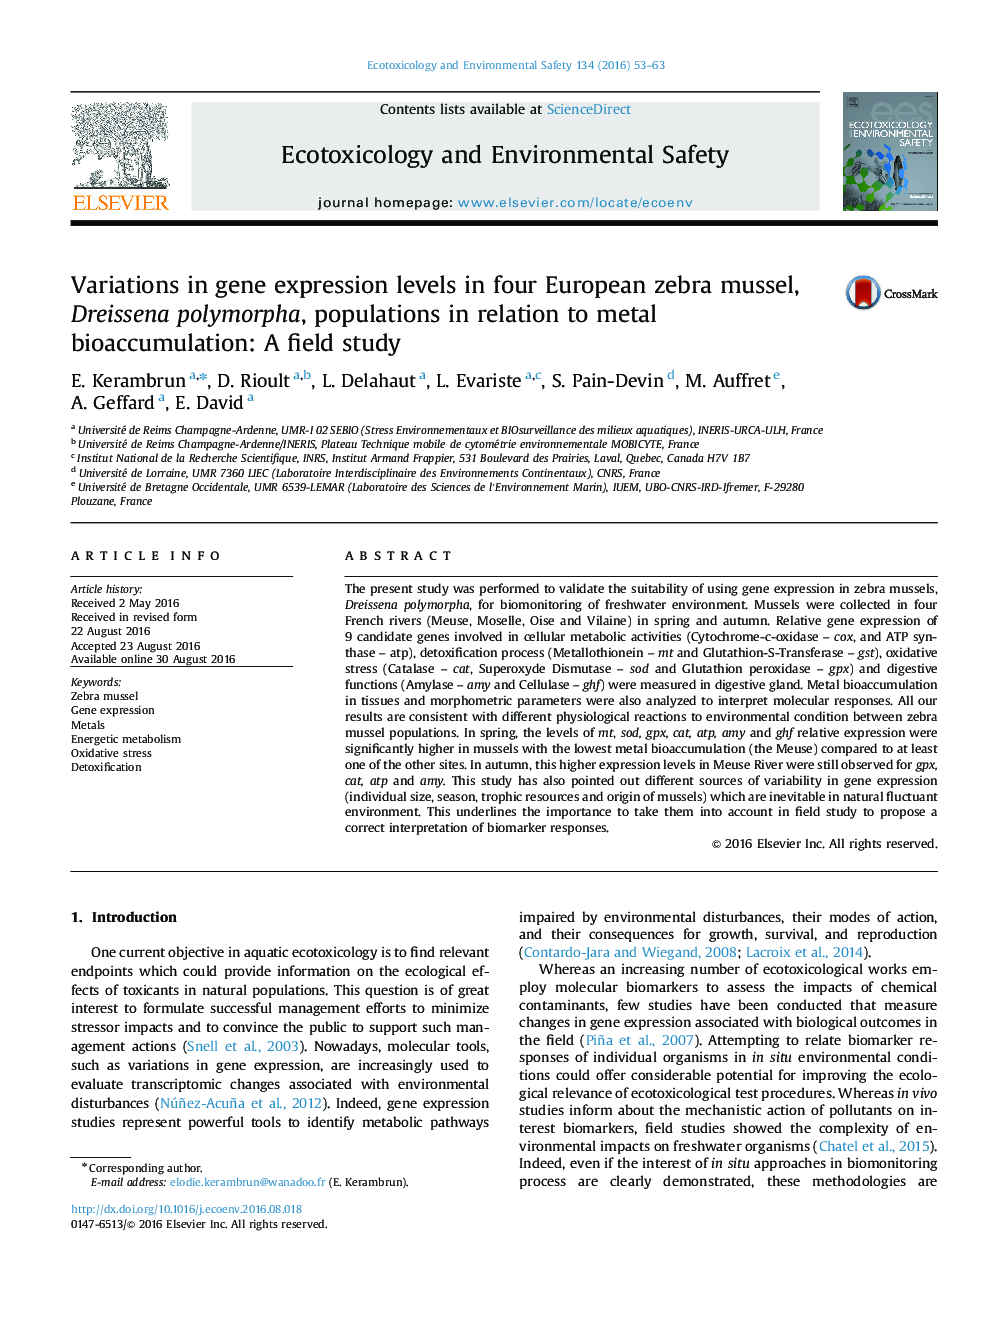 Variations in gene expression levels in four European zebra mussel, Dreissena polymorpha, populations in relation to metal bioaccumulation: A field study